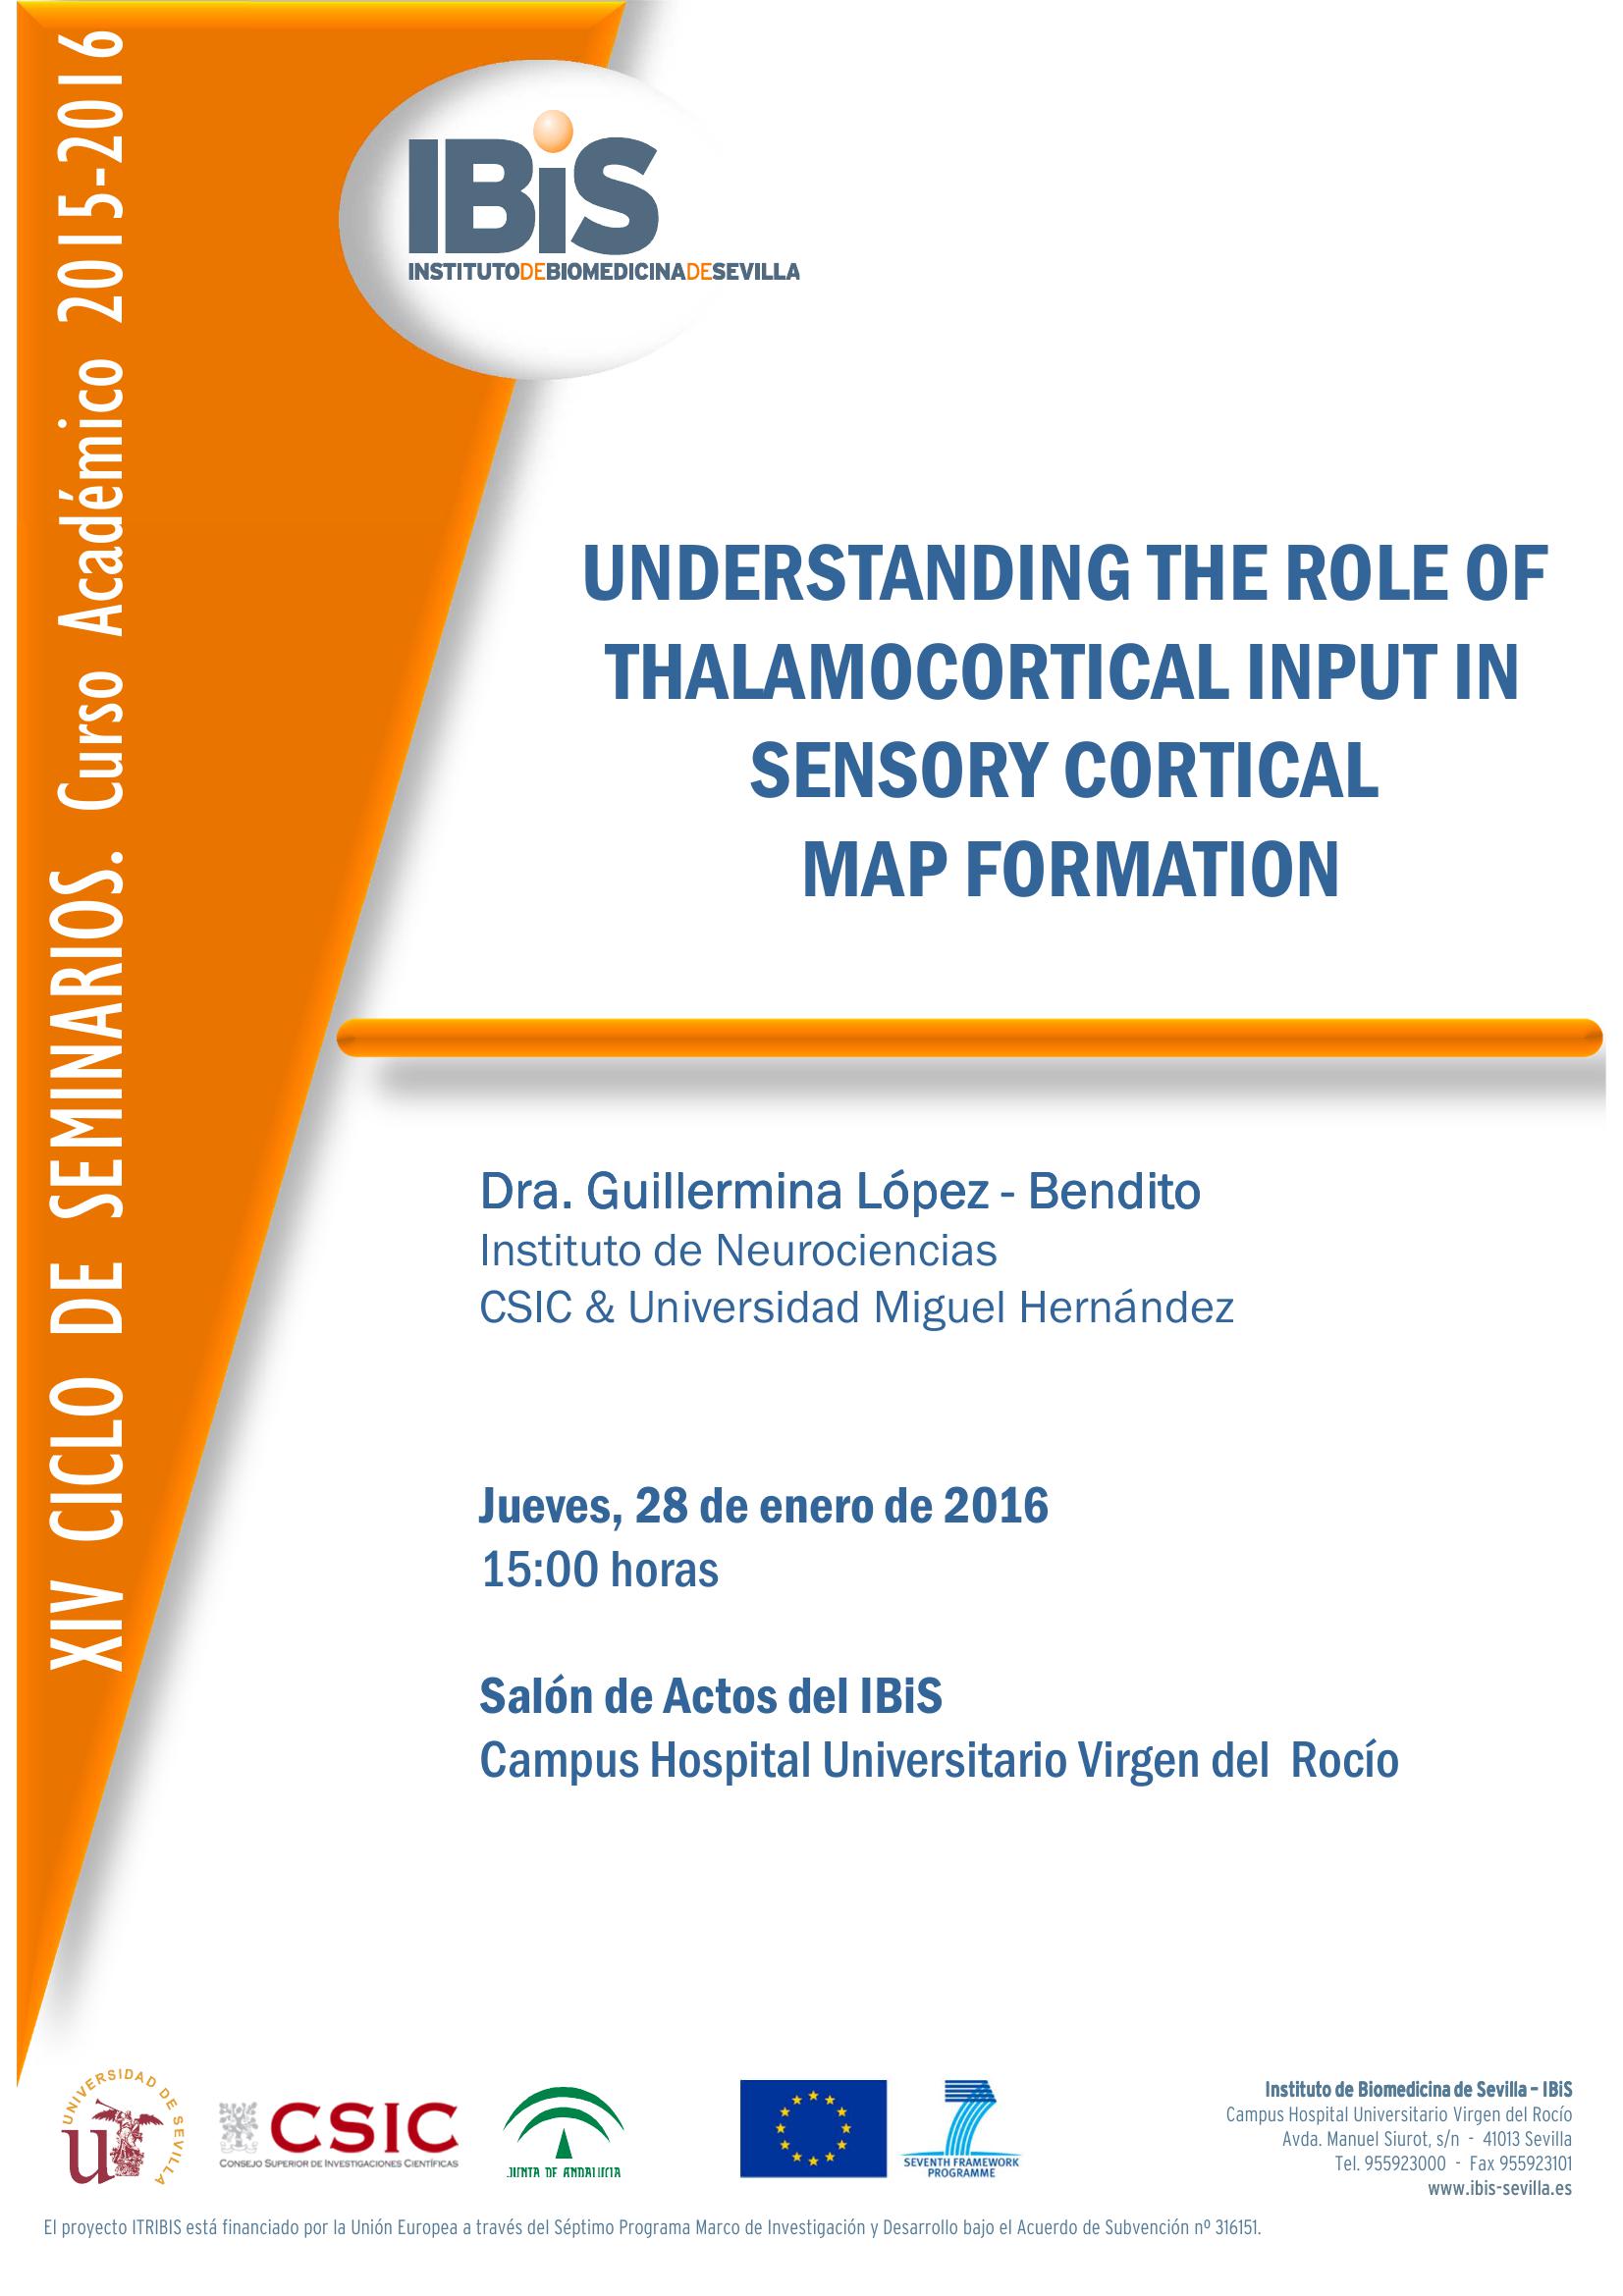 Poster: UNDERSTANDING THE ROLE OF THALAMOCORTICAL INPUT IN SENSORY CORTICAL  MAP FORMATION